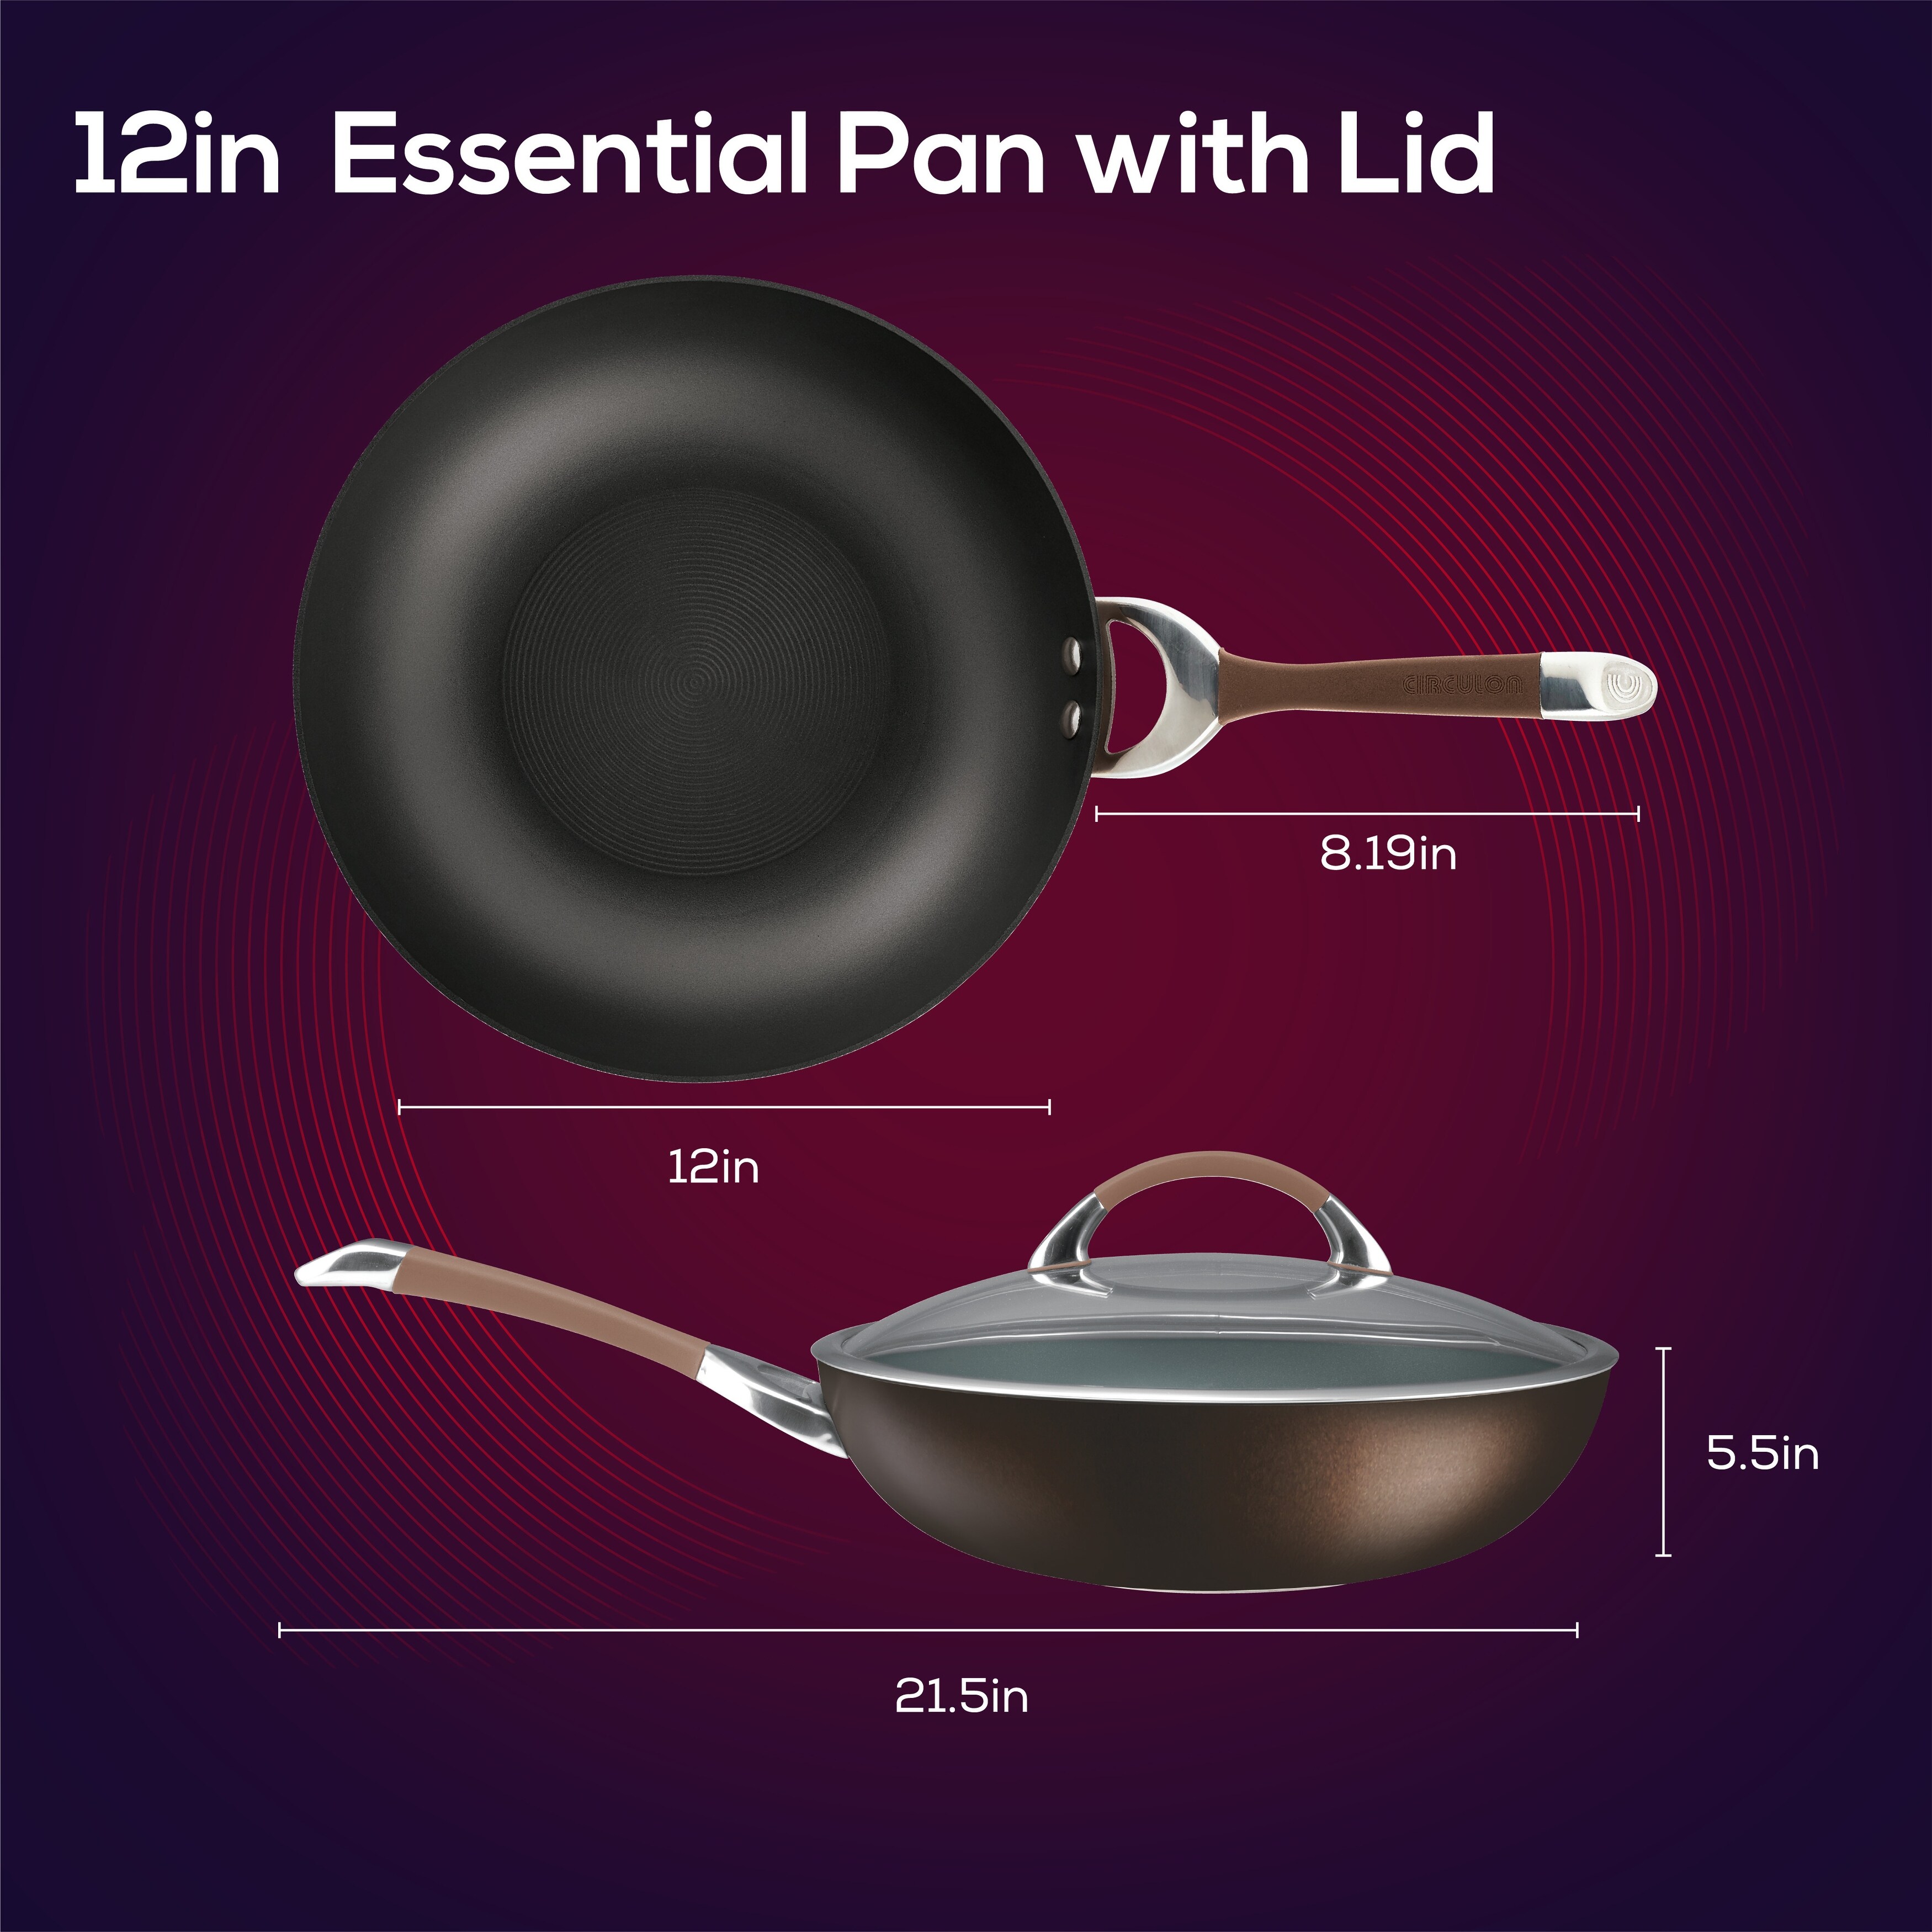 Circulon Symmetry Hard-Anodized Nonstick Cookware Induction Pots and Pans  Set, 11-Piece, Chocolate - Bed Bath & Beyond - 6243251